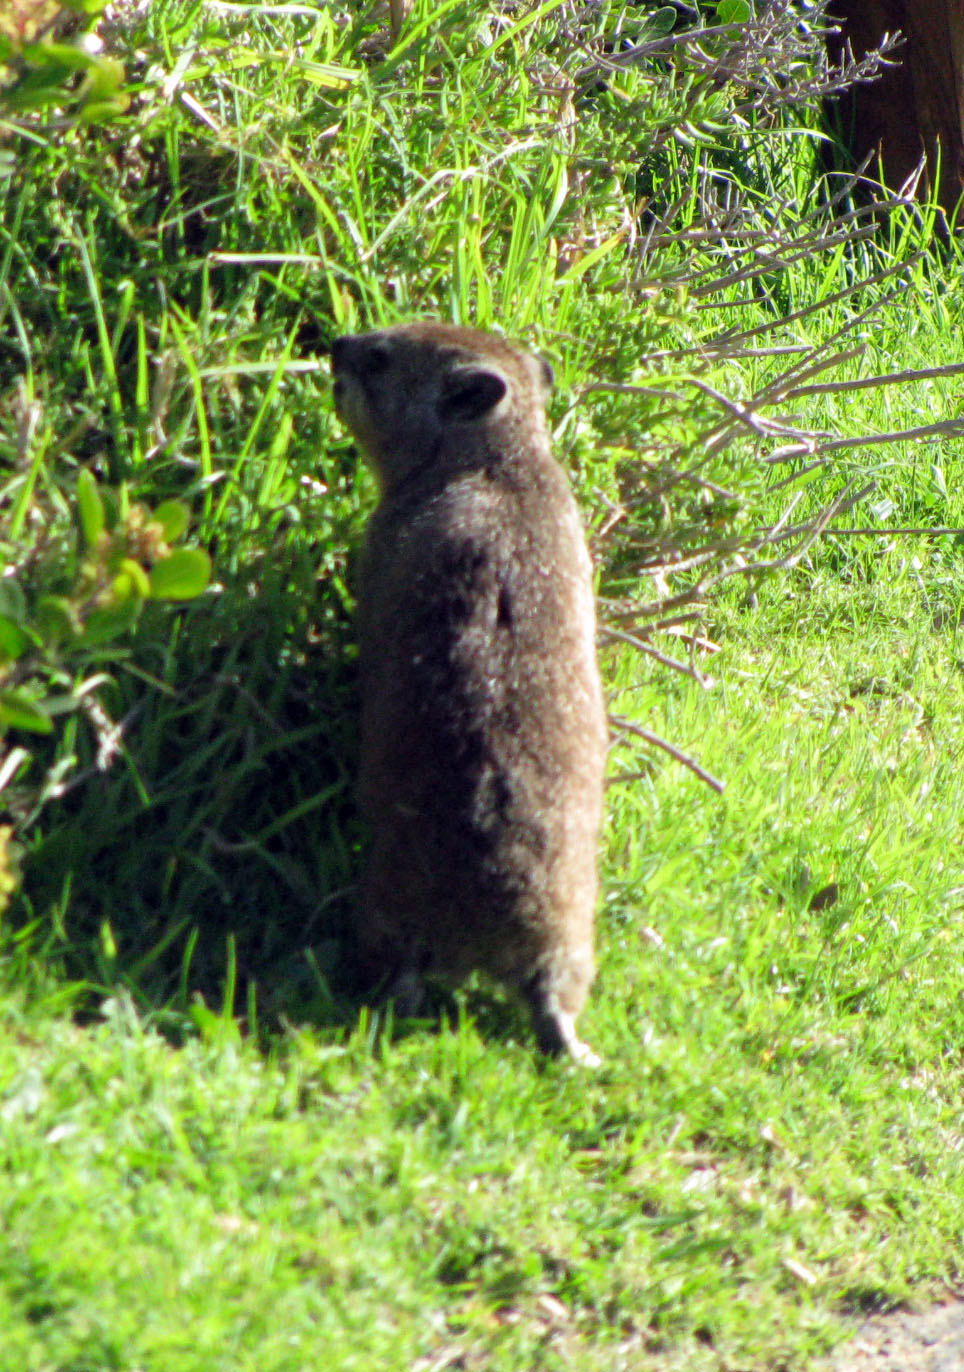 A rock hyrax, commonly called a dassie